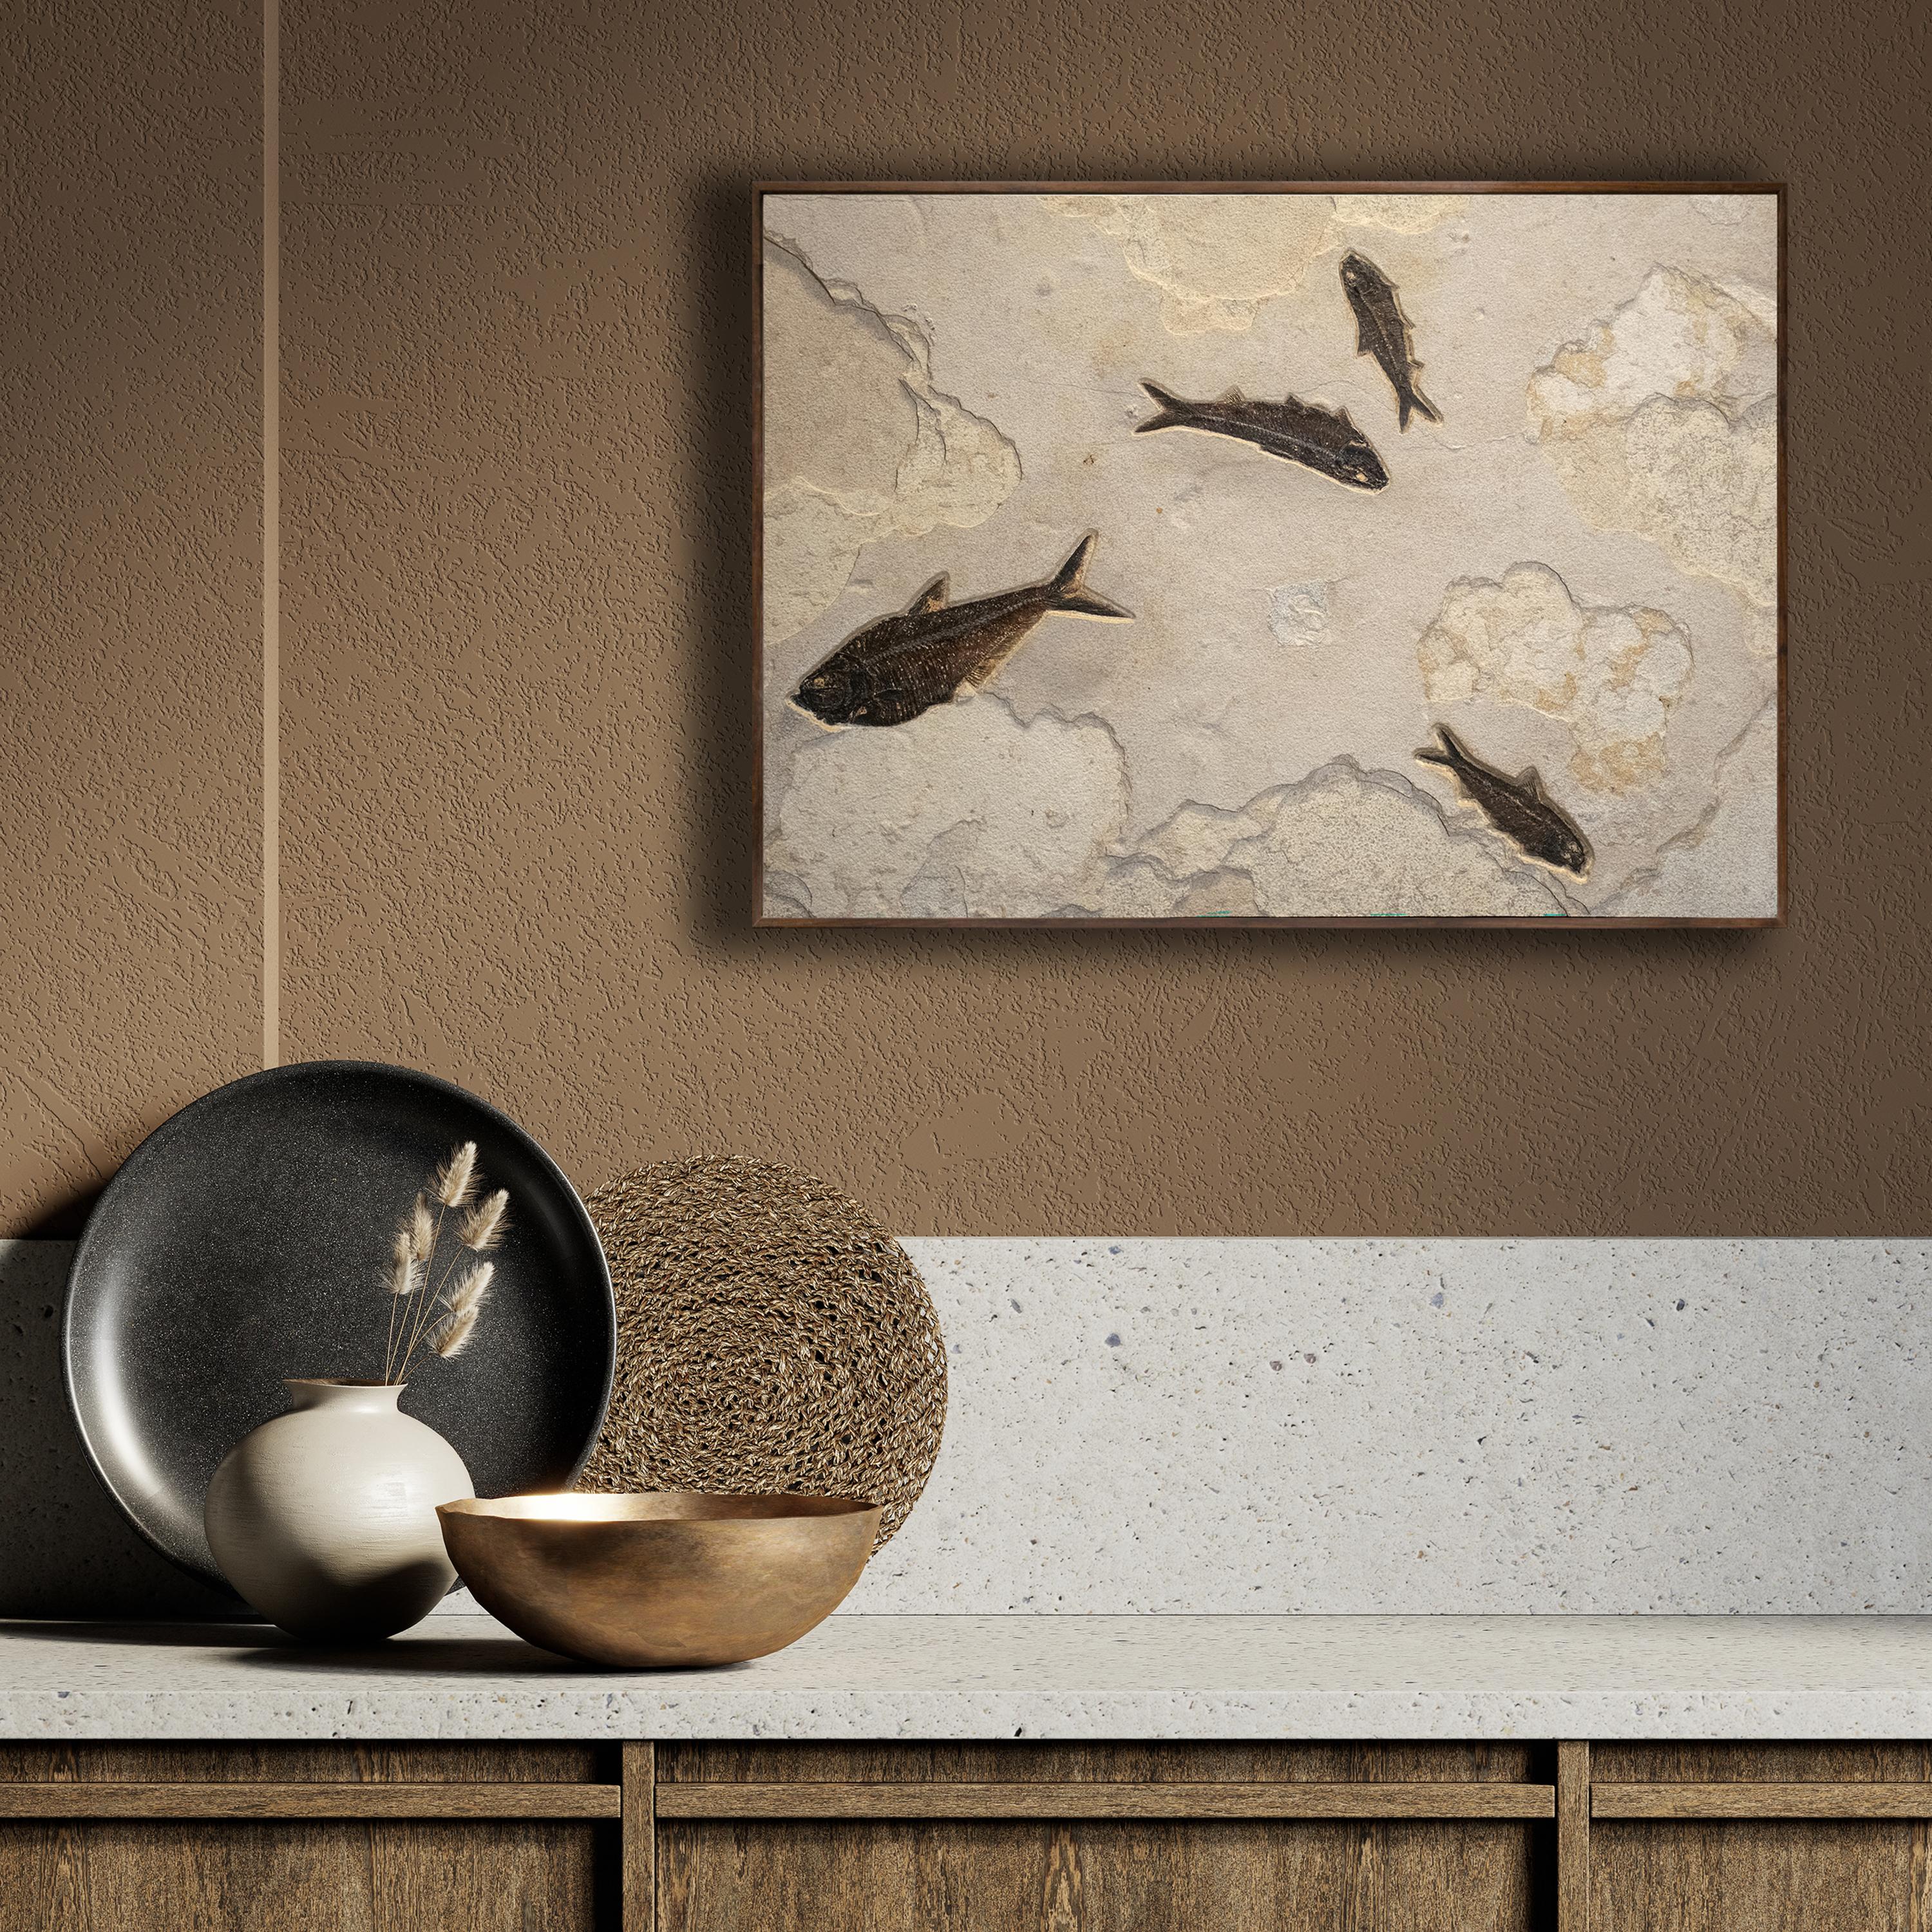 Eocene Era fossil fish from the Green River Formation are the feature in this sculptural stone mural: a Diplomystus dentatus is accented by three smaller Knightia eocaena. These fossil fish are about 50 million years old and are forever preserved in